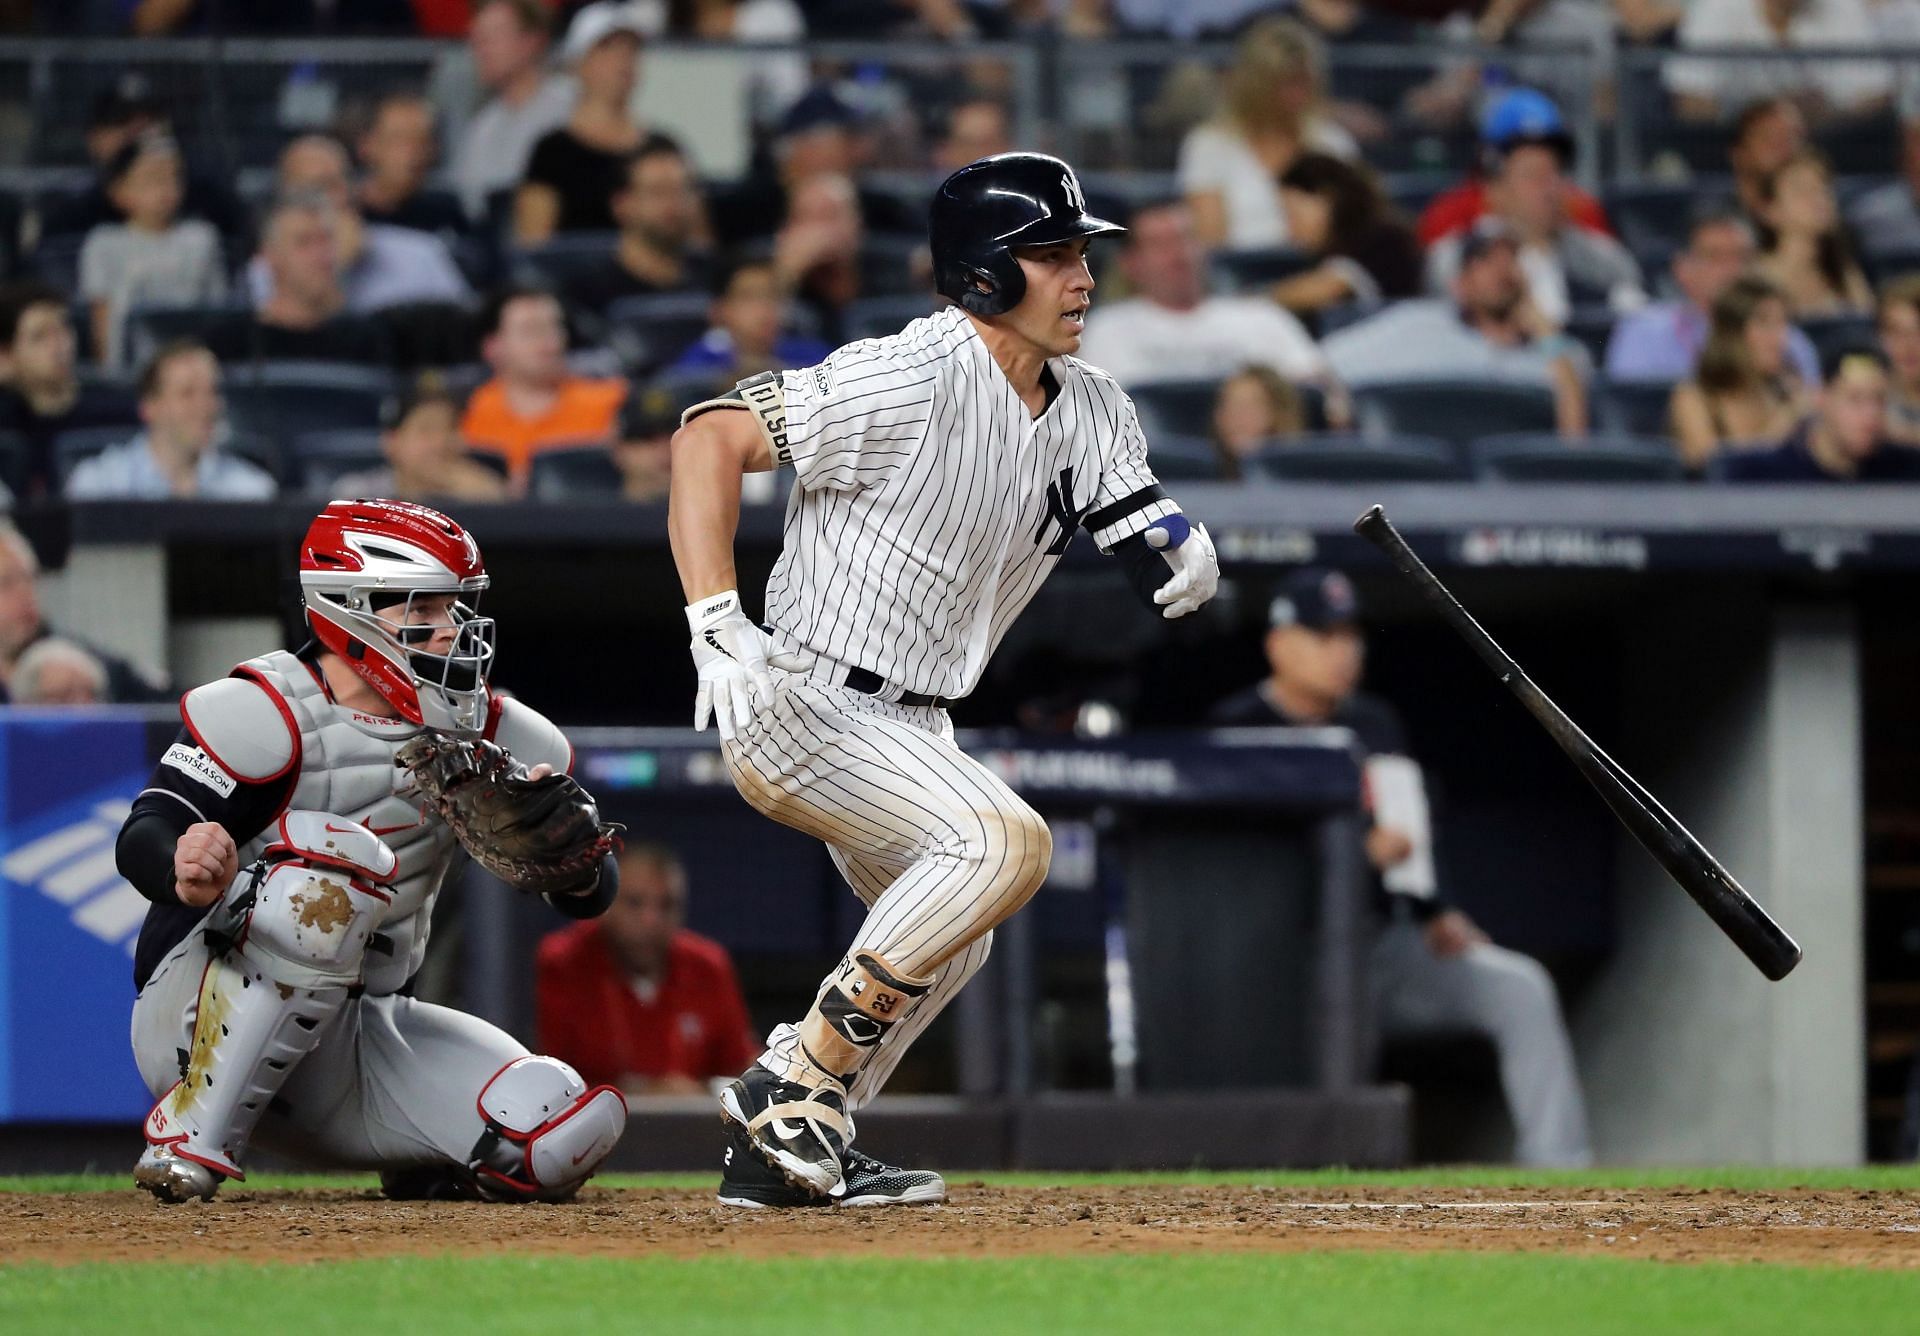 The Yankees should probably cut their losses with Jacoby Ellsbury